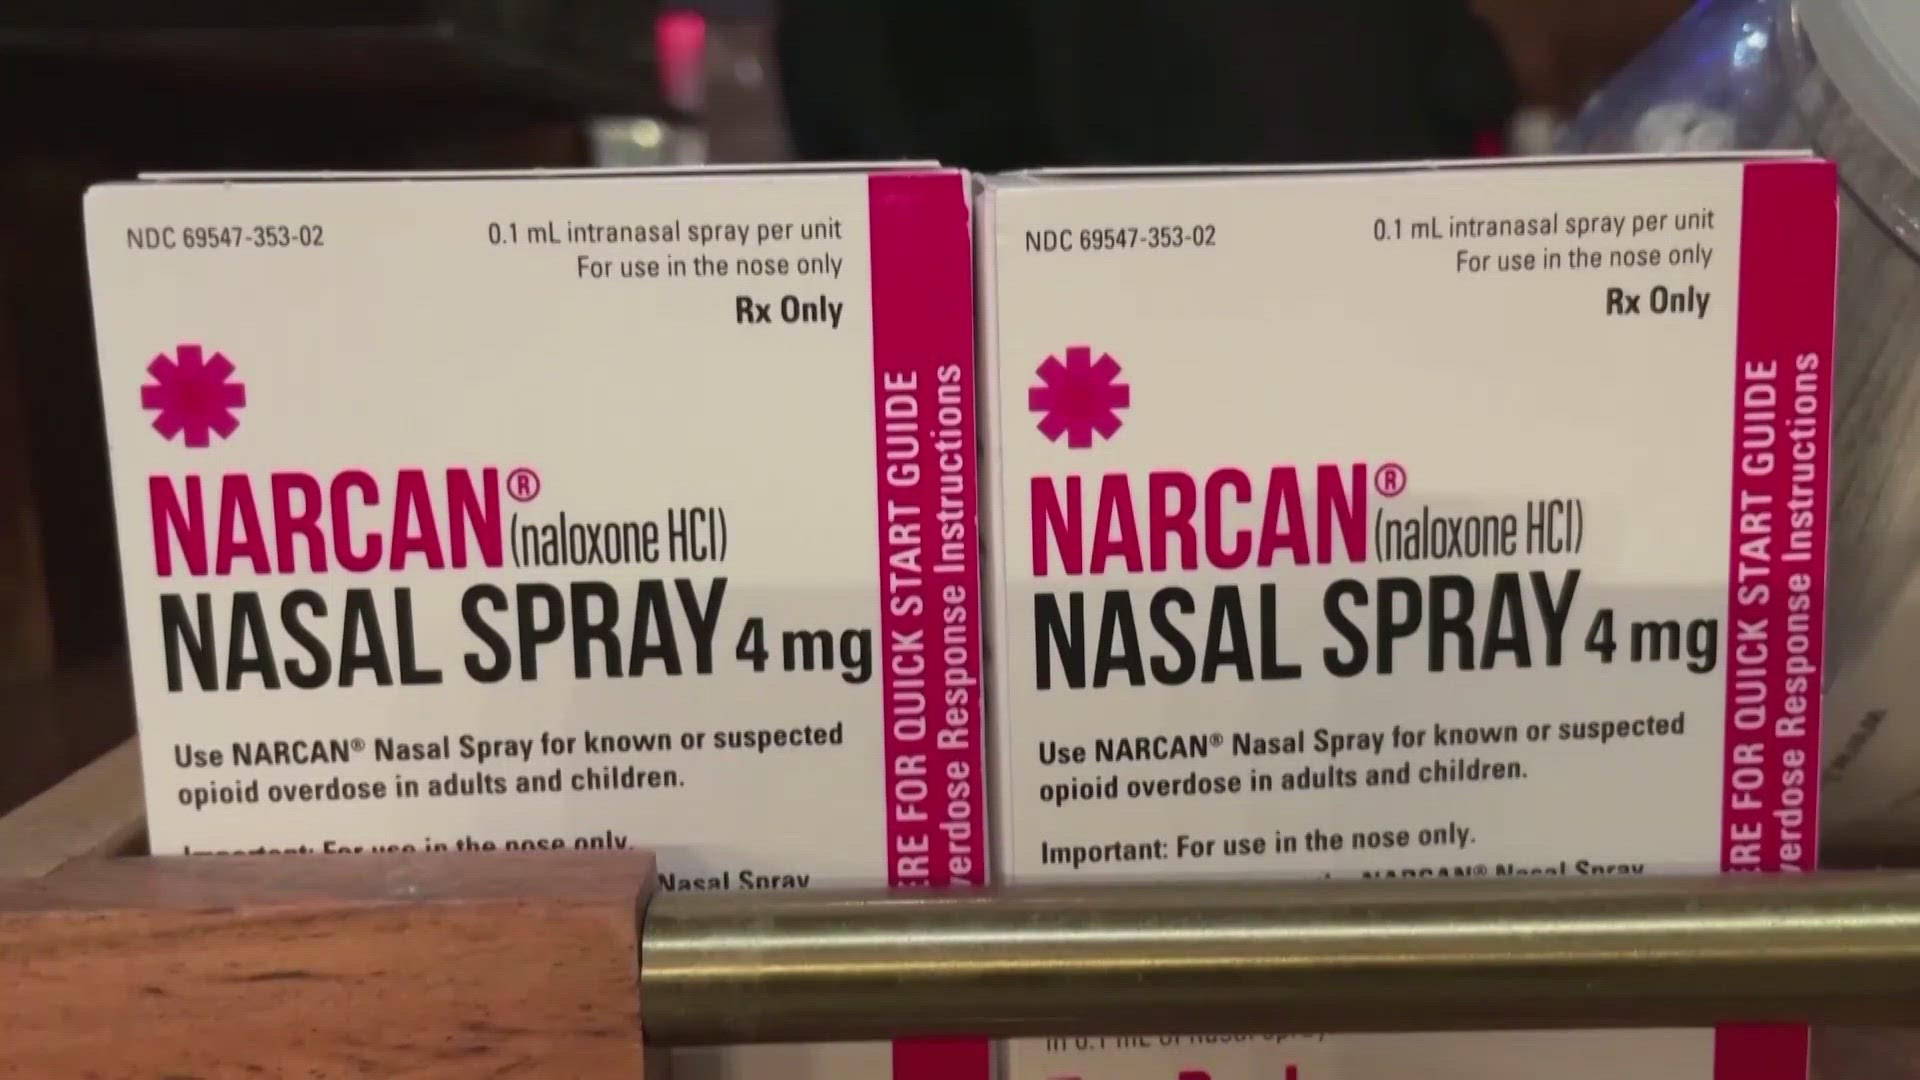 UT health system is working to make sure NARCAN gets into the hands of people who need it